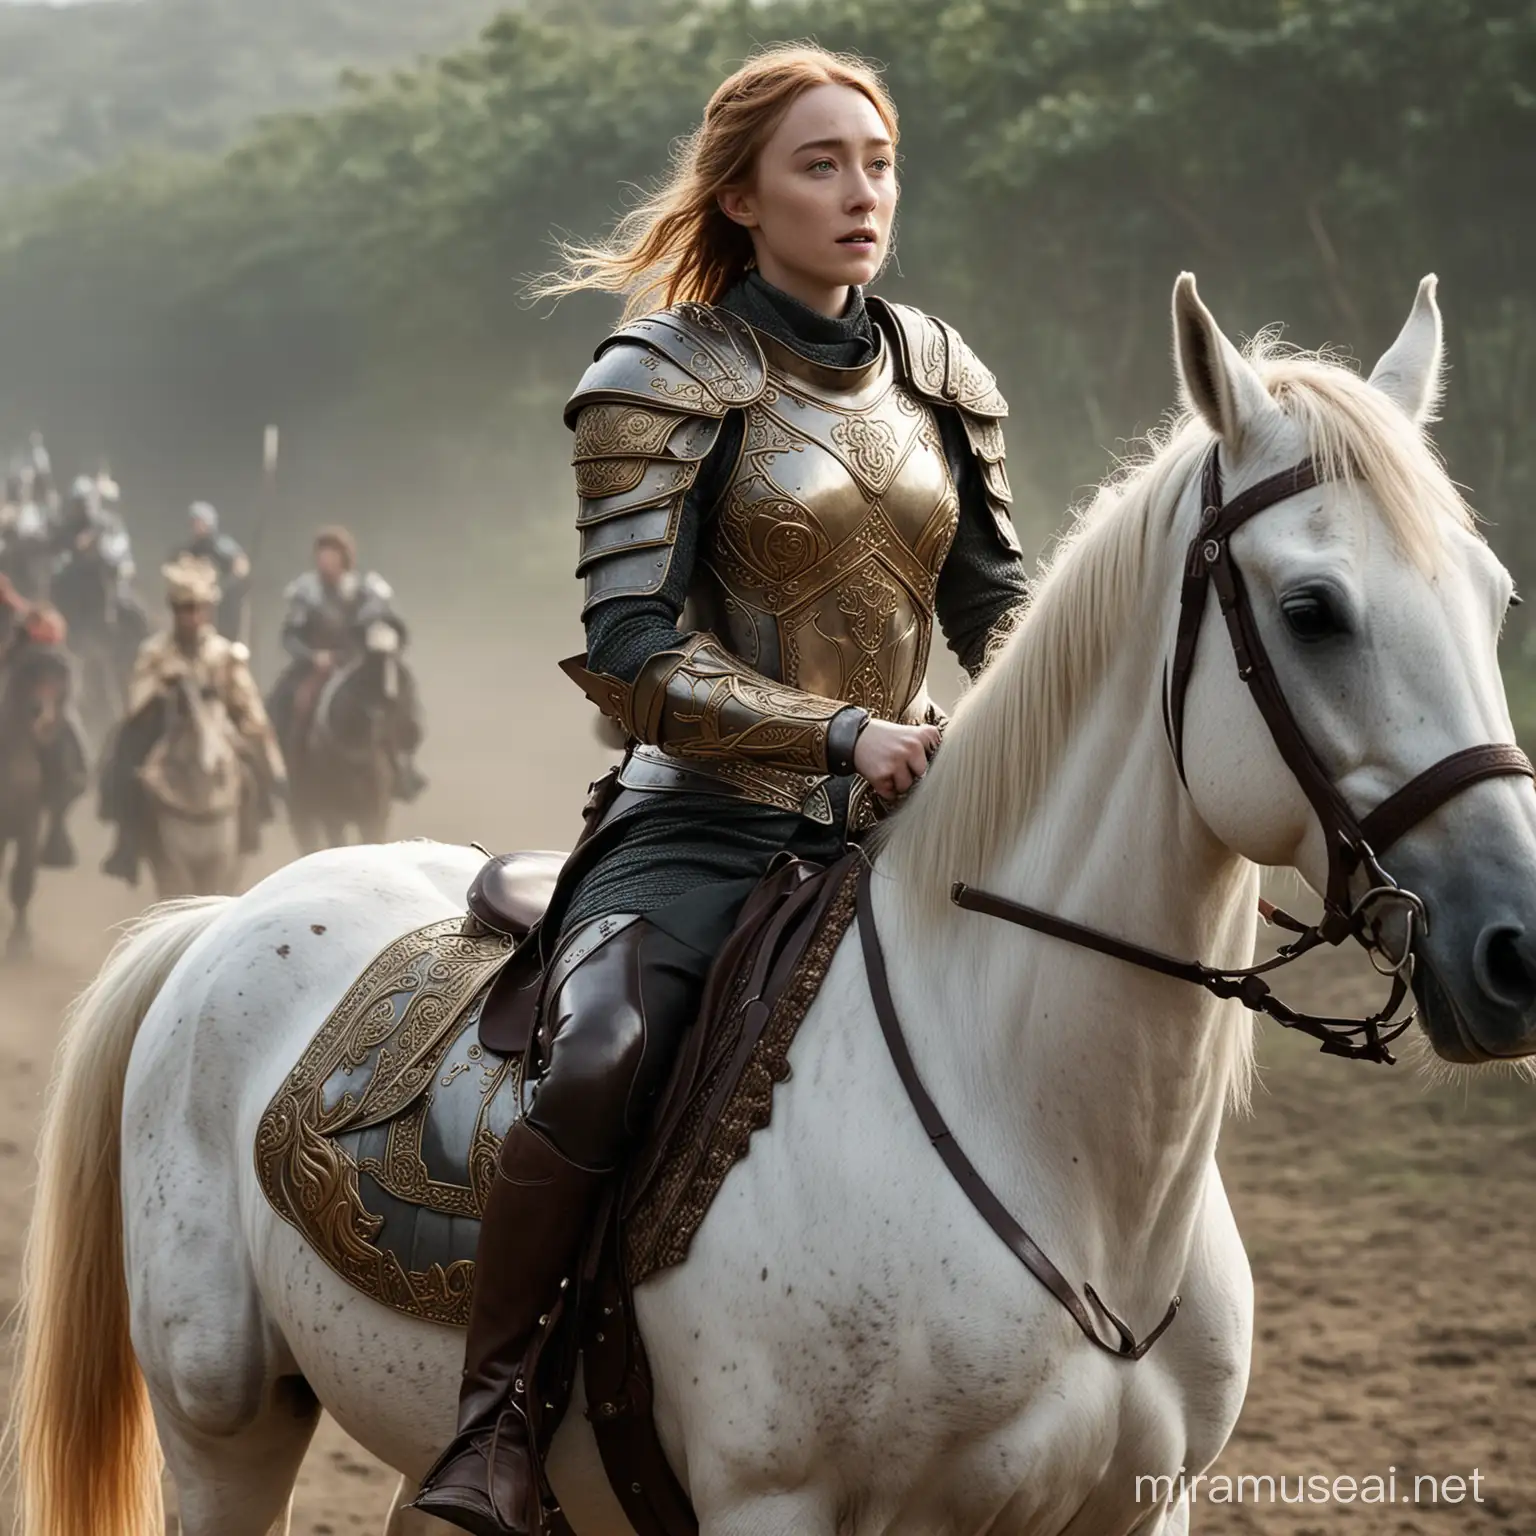 Saoirse Ronan Riding Horse in Paladin Armor for Battle Charge